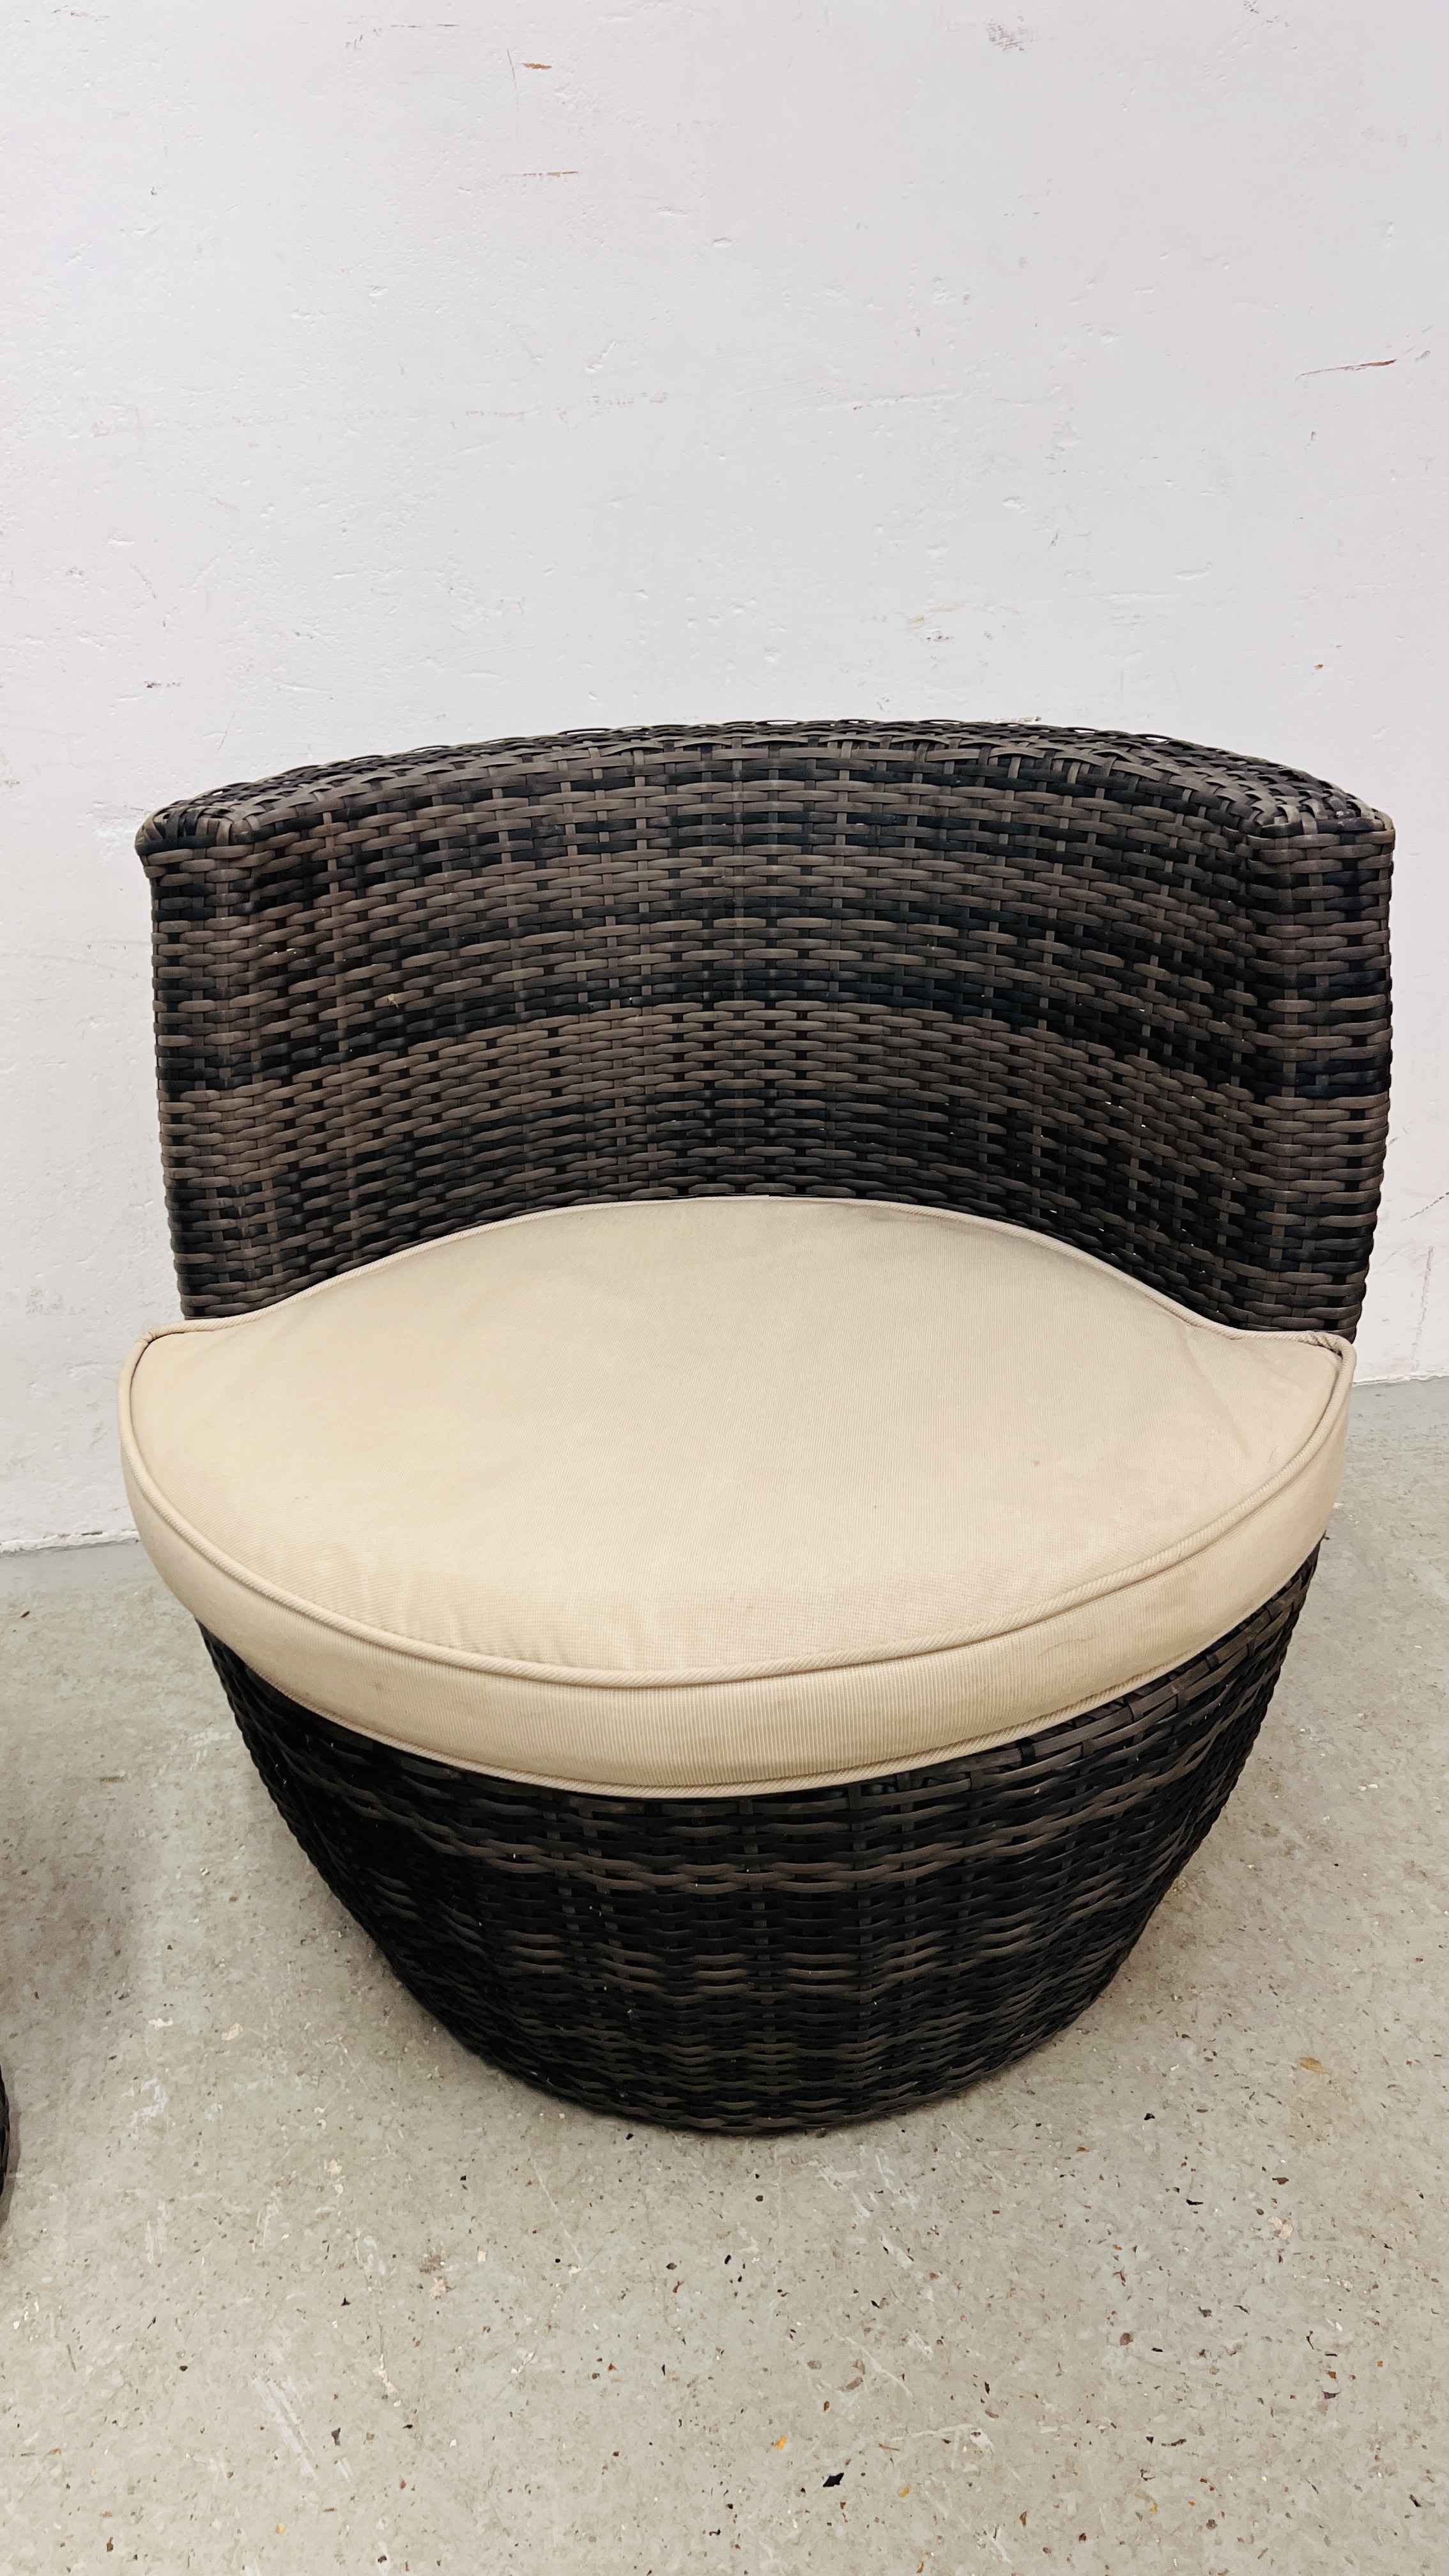 A PAIR OF MODERN GARDEN WOVEN BARREL CHAIRS ALONG WITH A MATCHING CIRCULAR TABLE. - Image 6 of 8